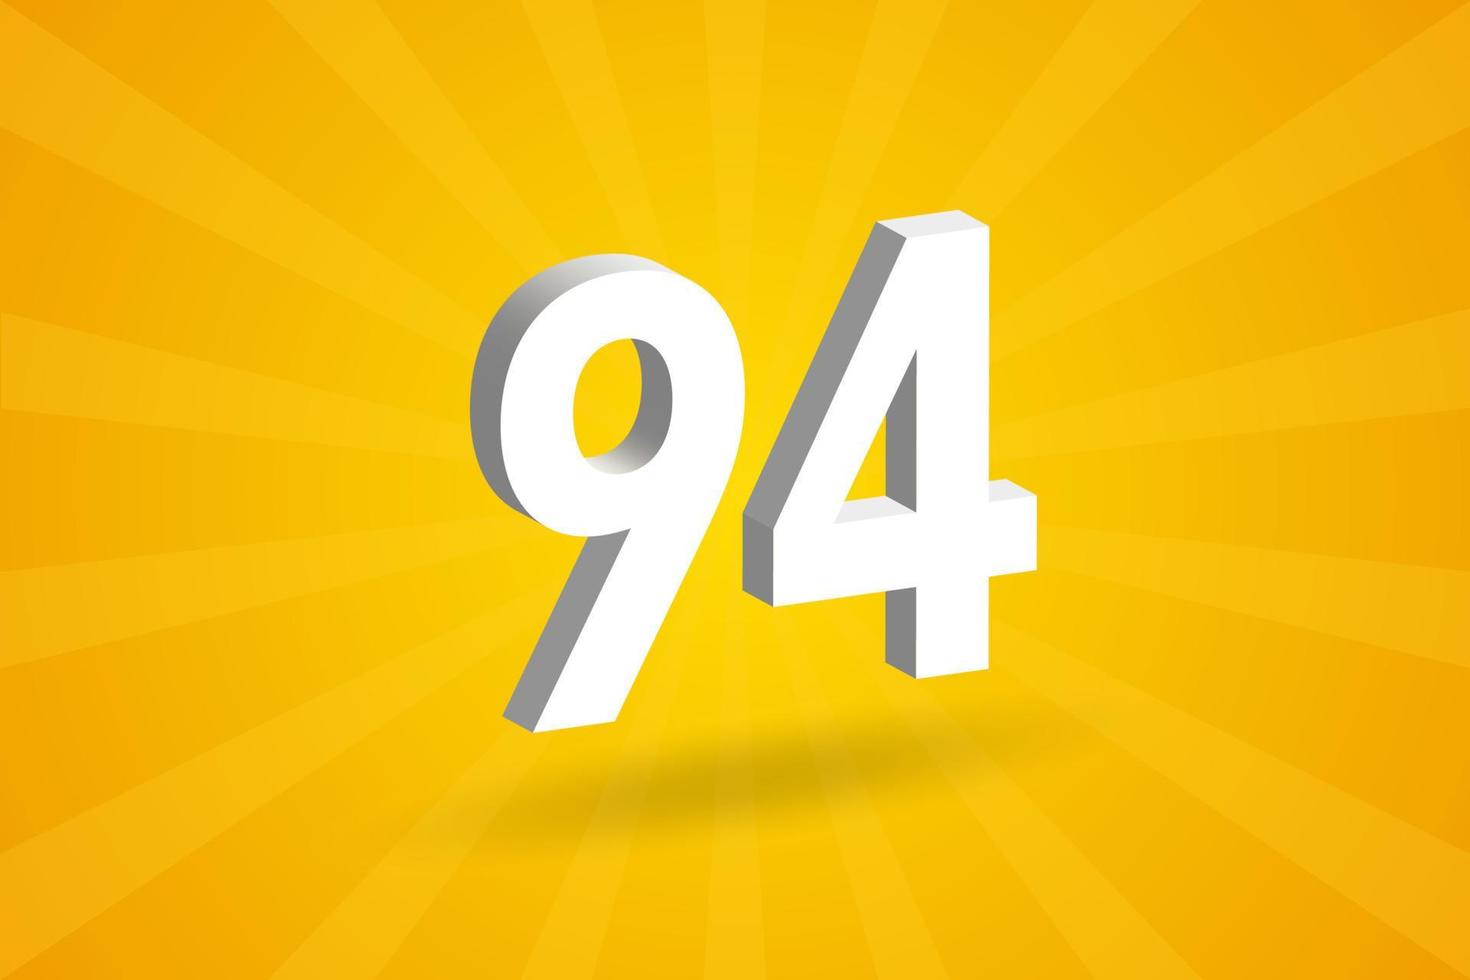 3D 94 number font alphabet. White 3D Number 94 with yellow background vector